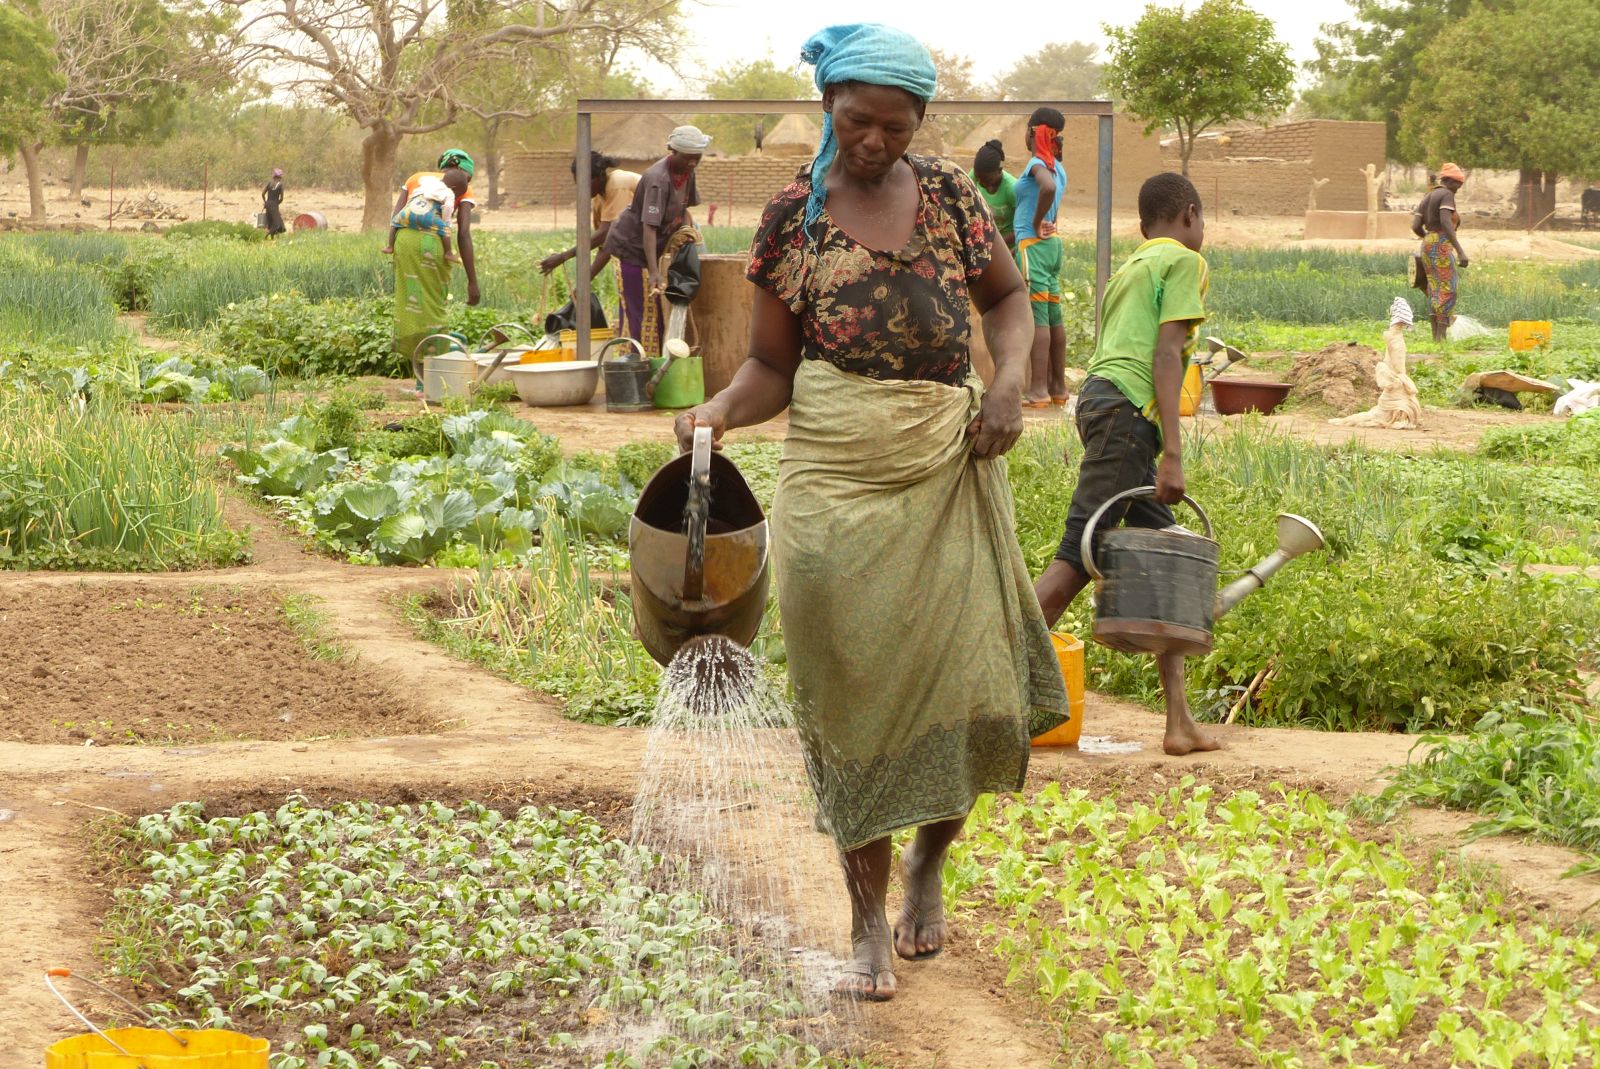 Support for farming is crucial for reducing poverty: Women in business as commercial vegetable growers in Burkina Faso.